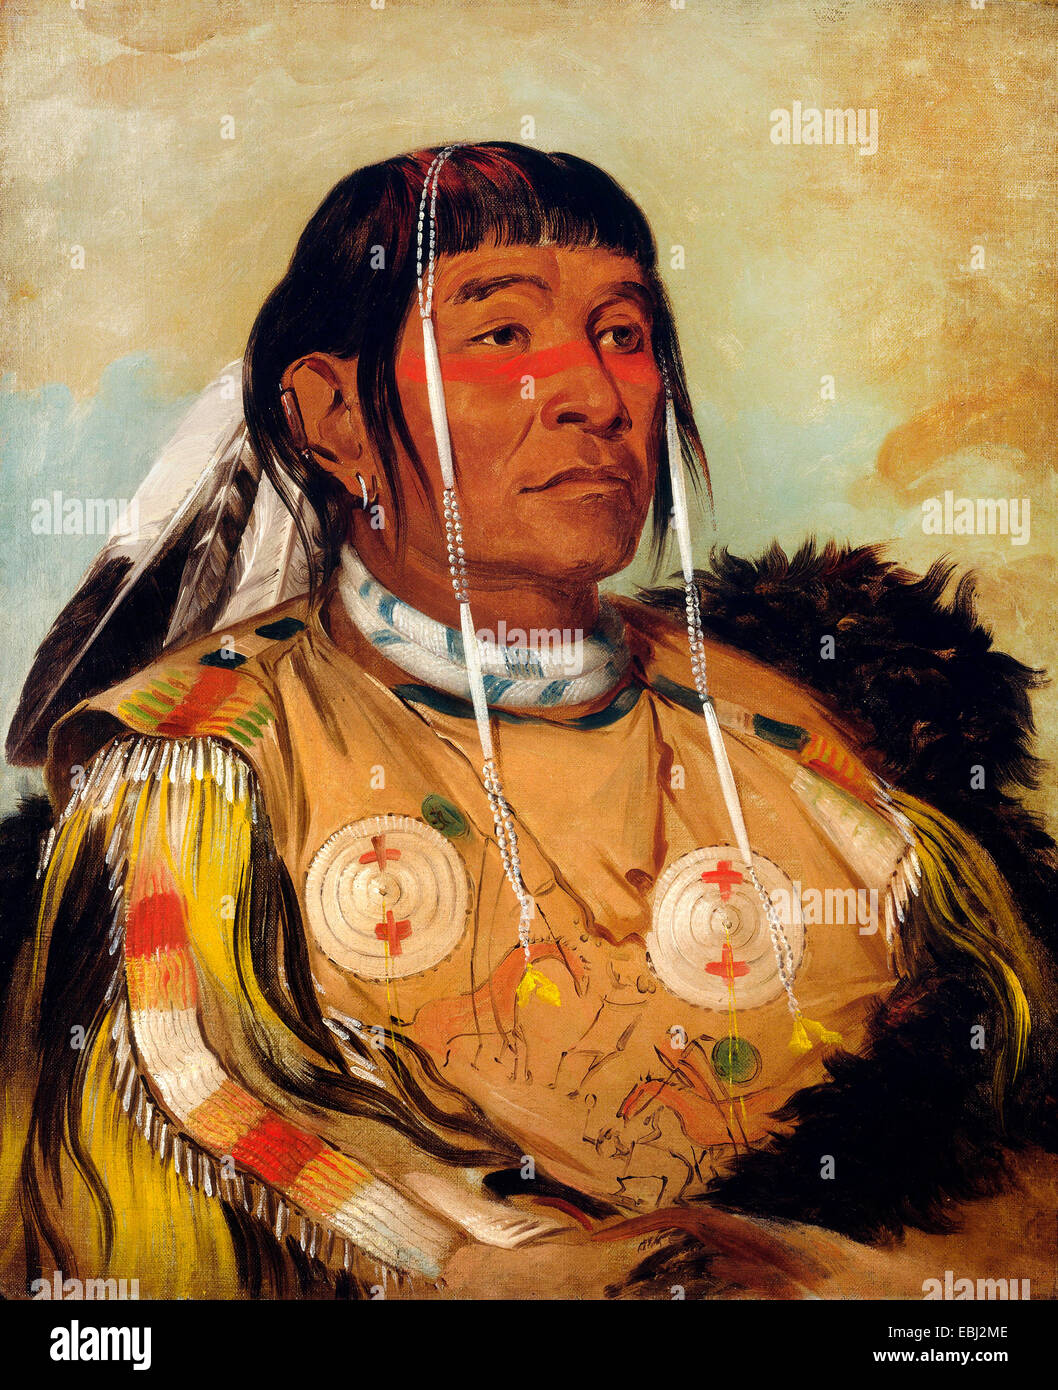 George Catlin, Sha-co-pay, The Six, Chief of the Plains Ojibwa 1832 Oil on canvas. Smithsonian American Art Museum, Washington Stock Photo